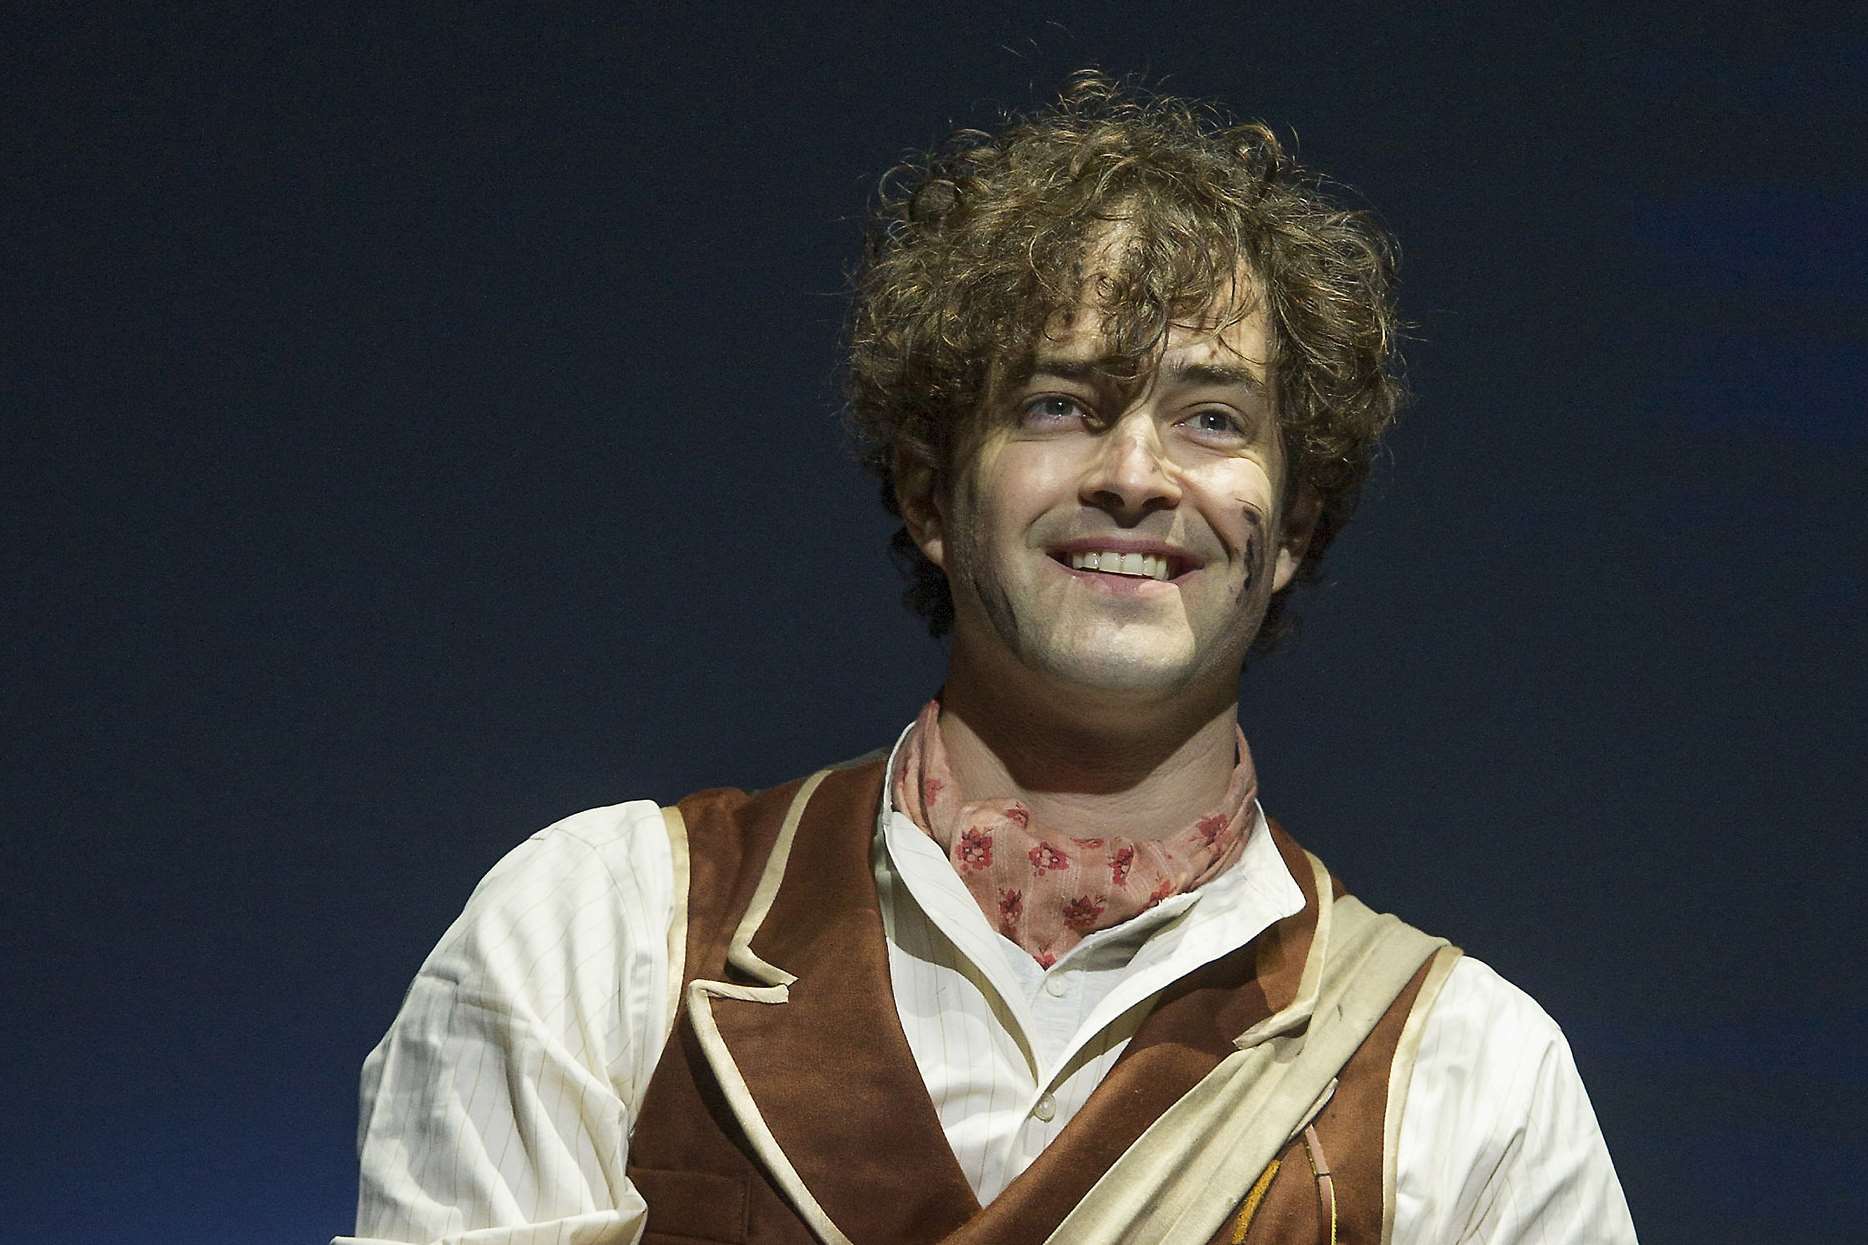 Lee Mead was in Chitty Chitty Bang Bang